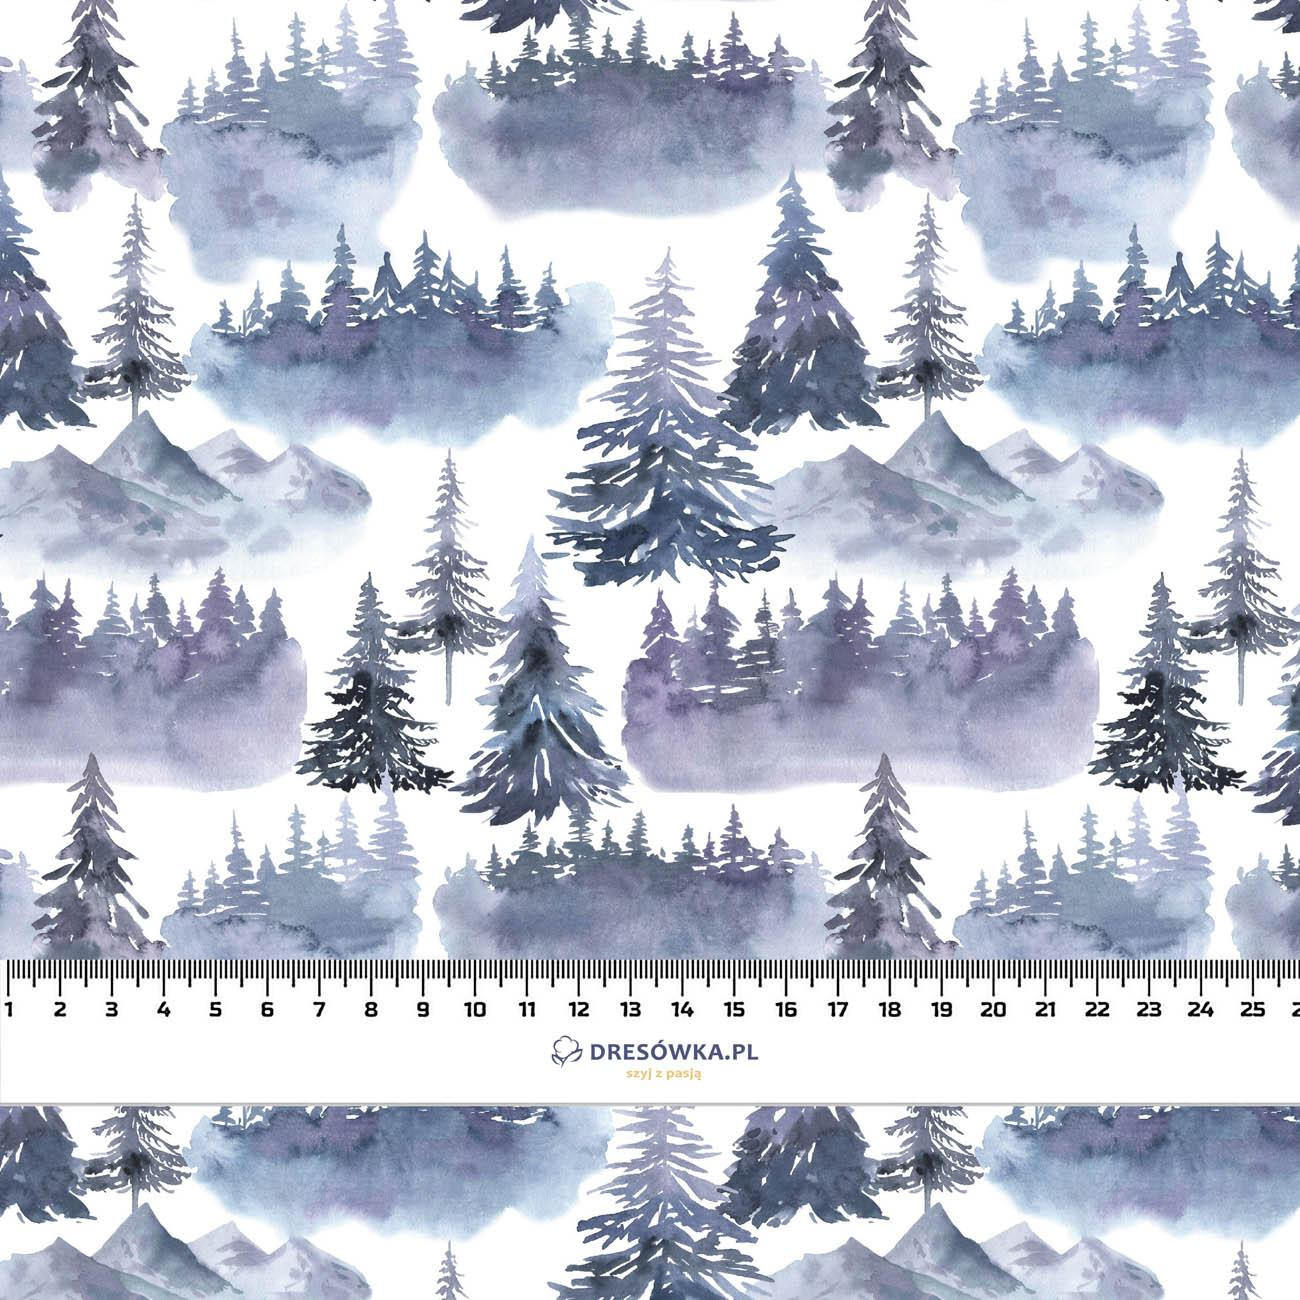 100cm FOREST LANDSCAPE (PAINTED FOREST) - Waterproof woven fabric